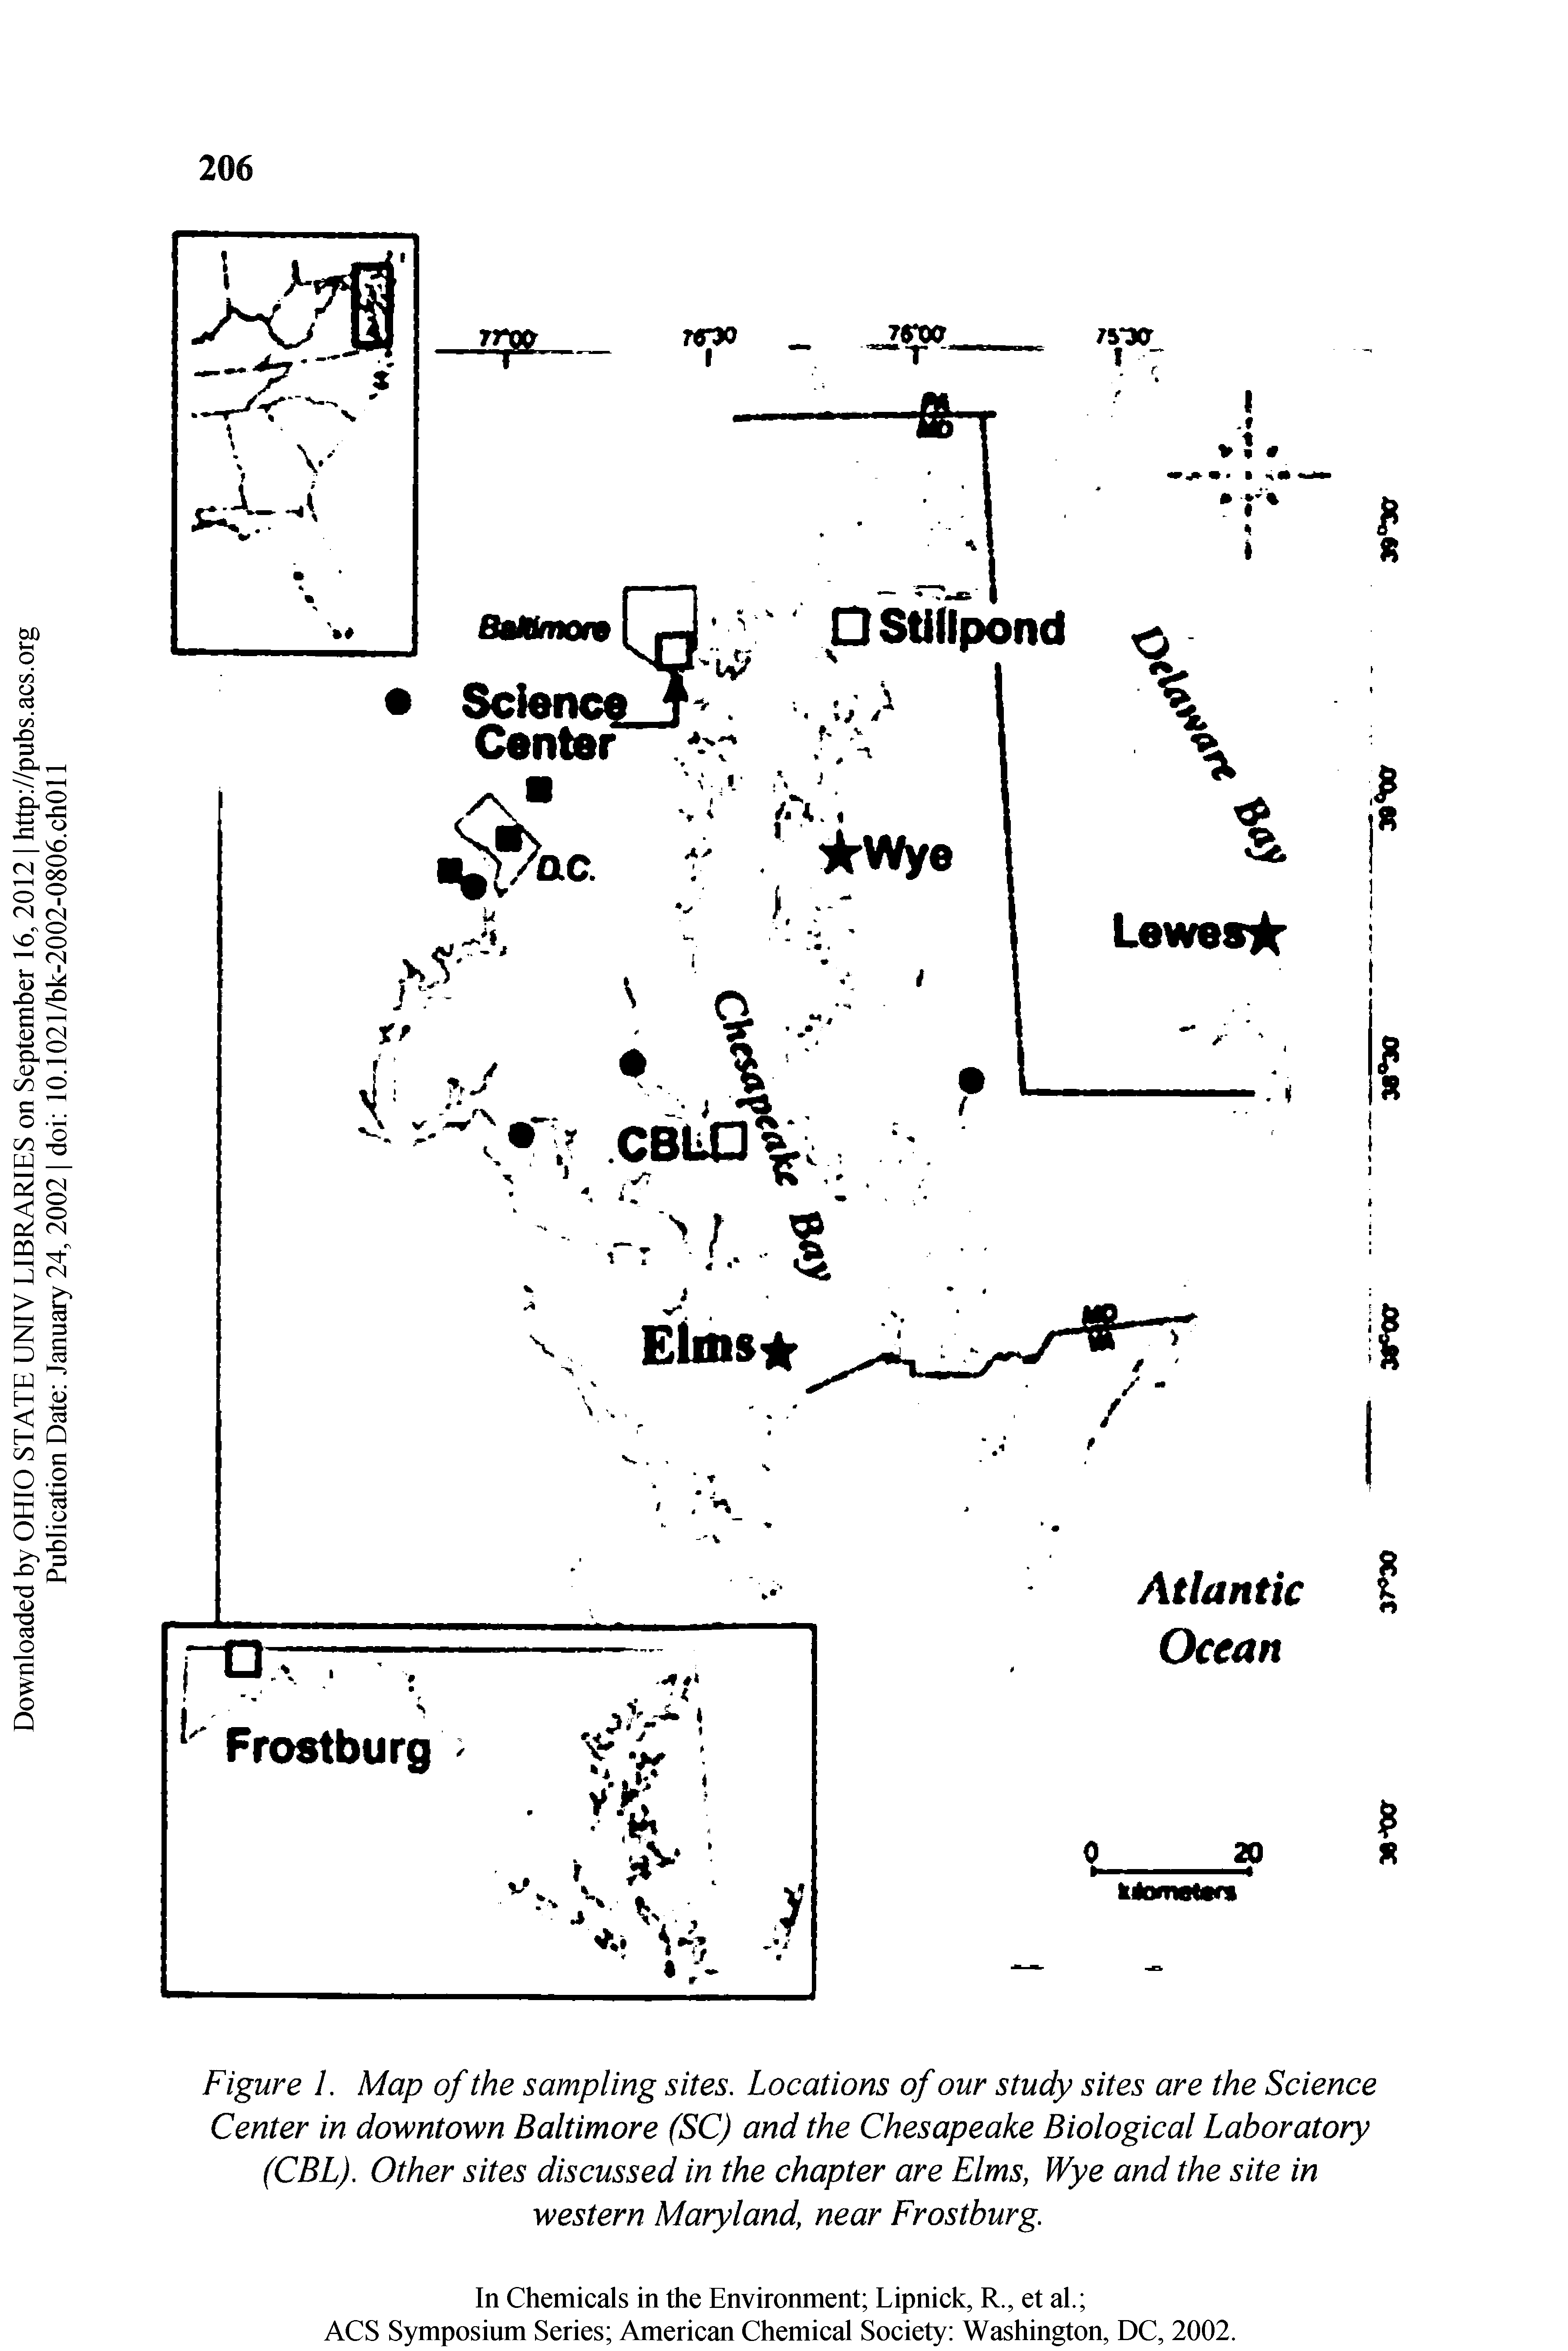 Figure L Map of the sampling sites. Locations of our study sites are the Science Center in downtown Baltimore (SC) and the Chesapeake Biological Laboratory (CBL). Other sites discussed in the chapter are Elms, Wye and the site in western Maryland, near Frostburg.